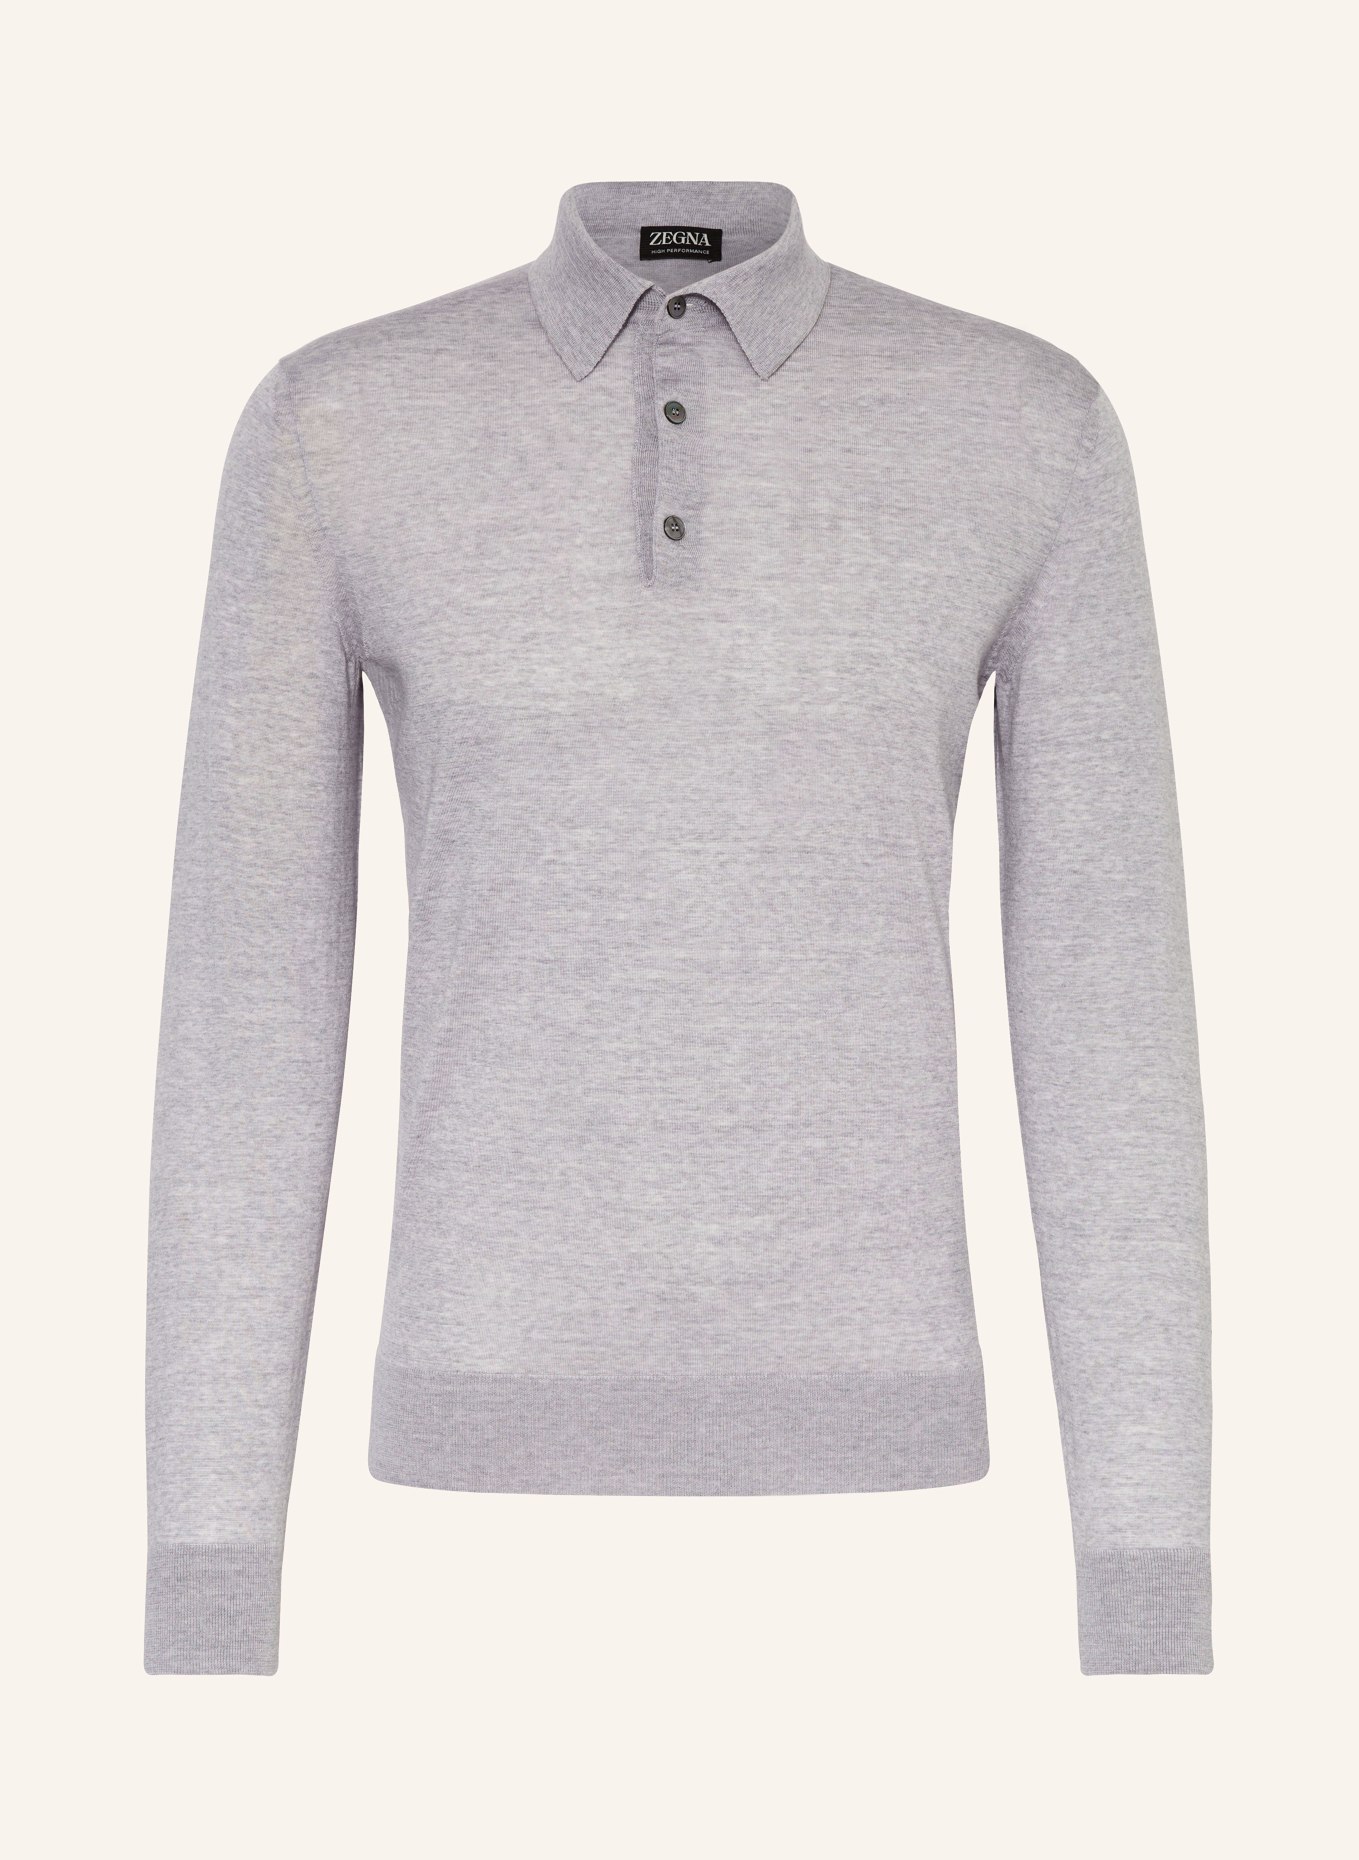 ZEGNA Sweater, Color: LIGHT GRAY (Image 1)